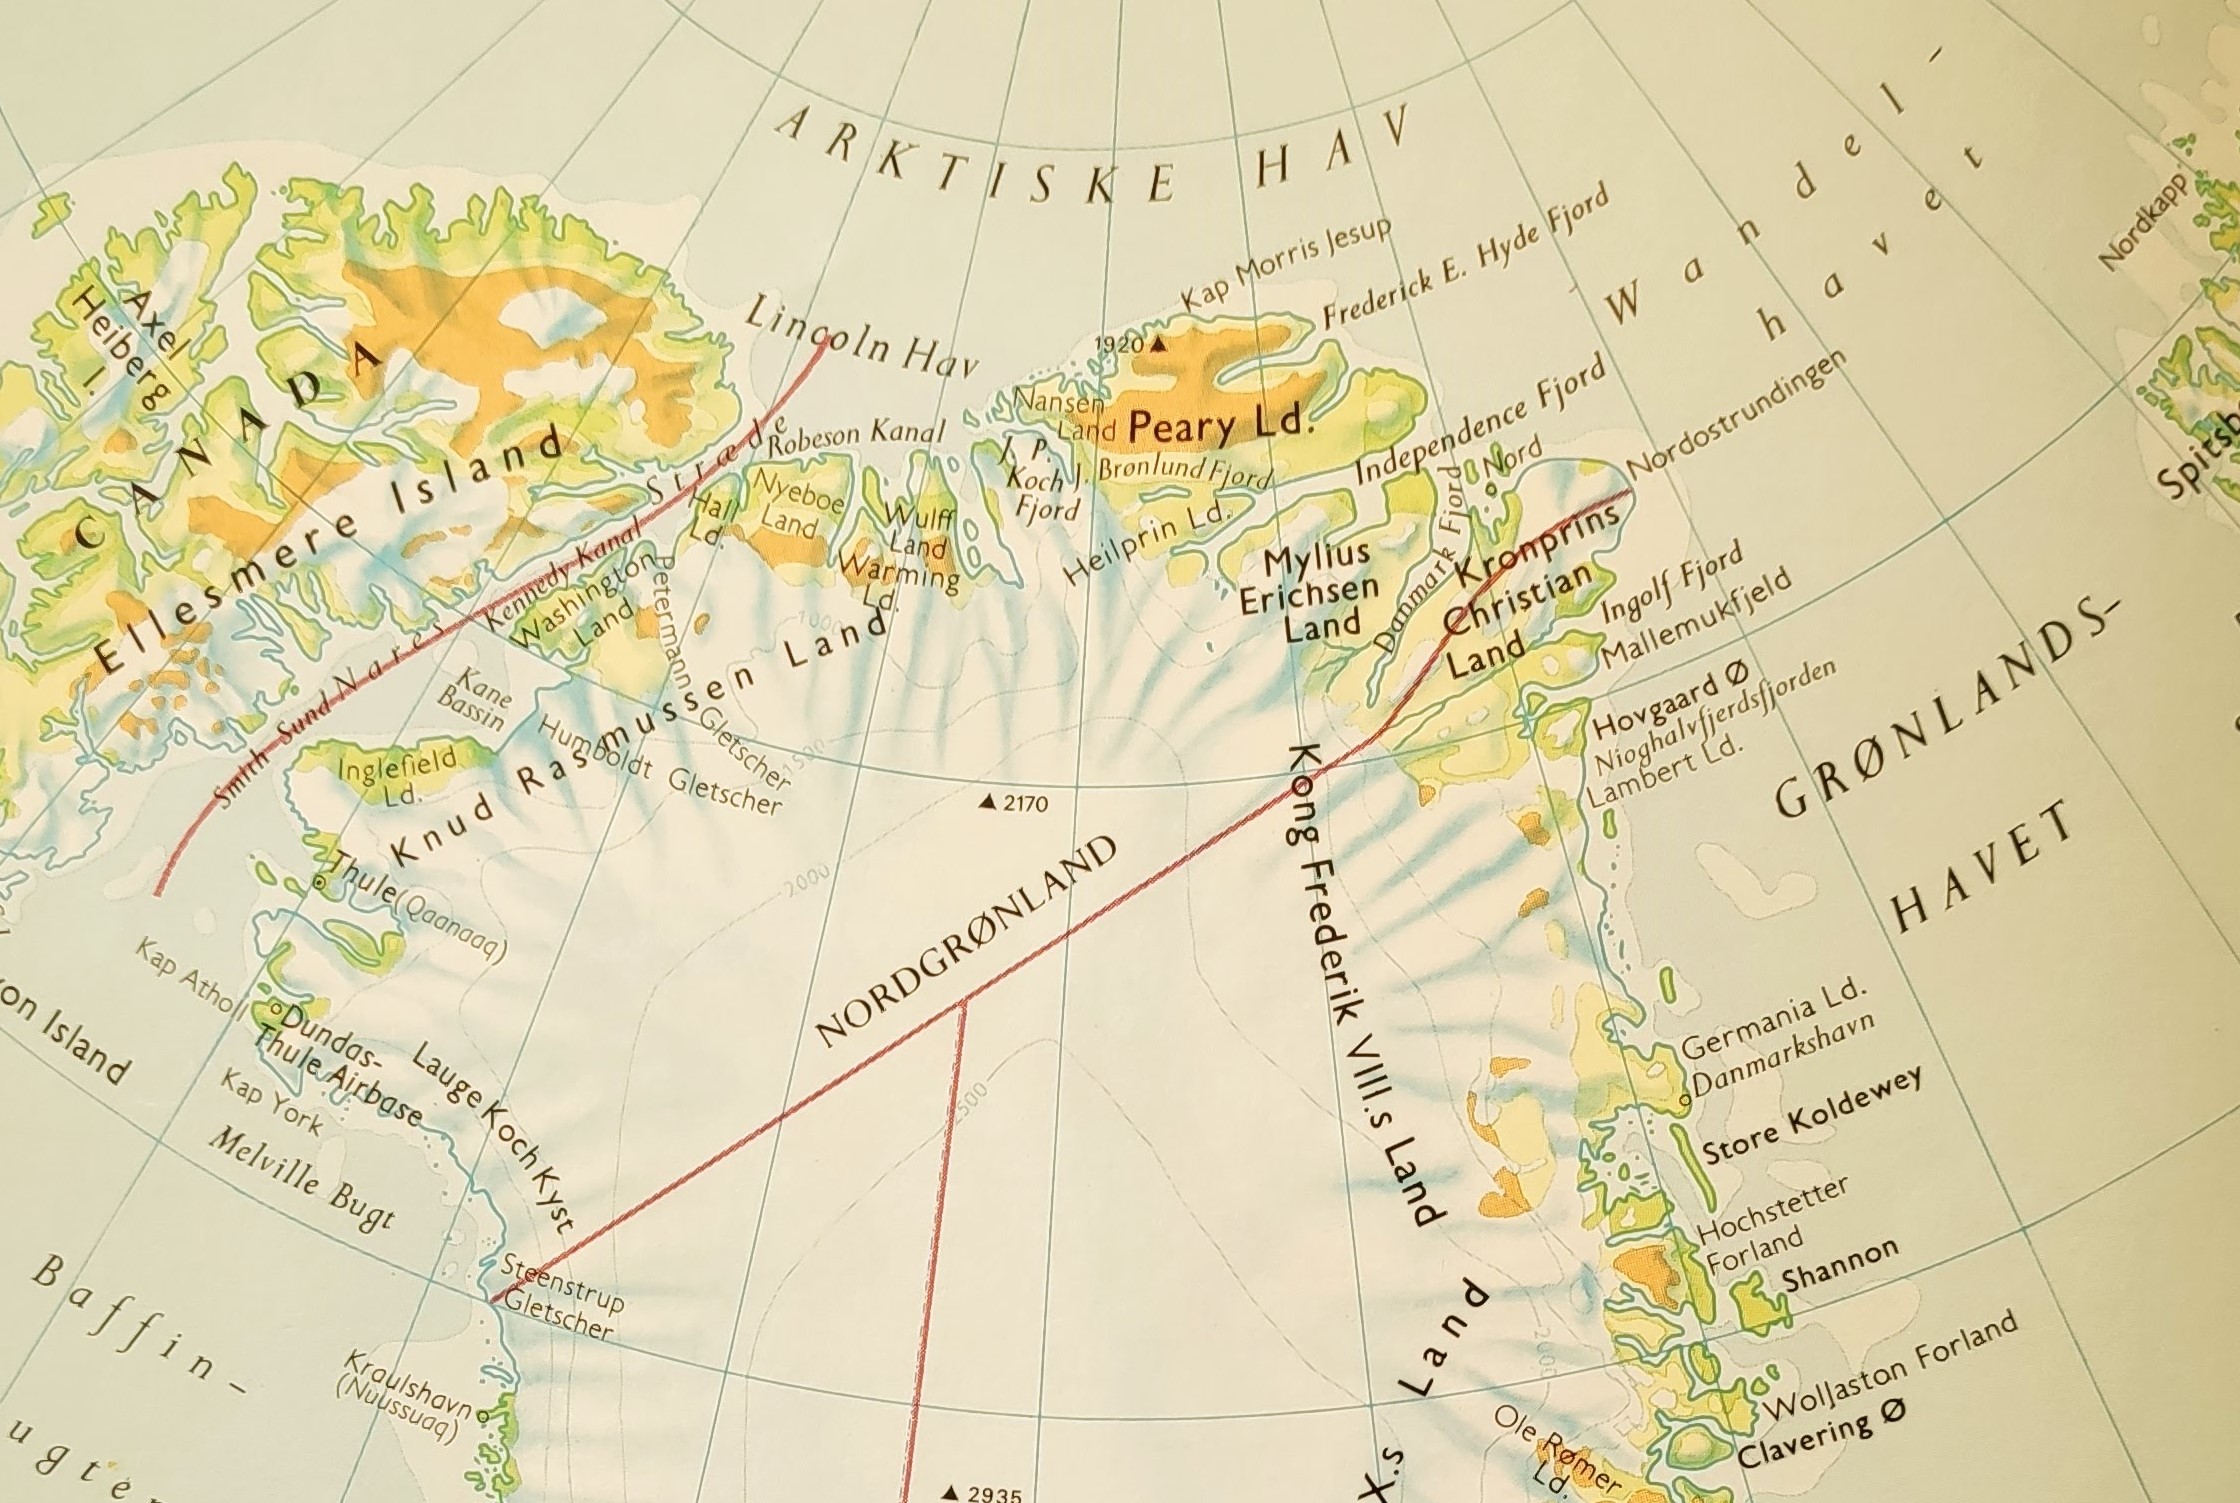 Figure 2: Map of Greenland from 1988, showing Knud Rasmussen land, Melville bay and Danmark Fjord.